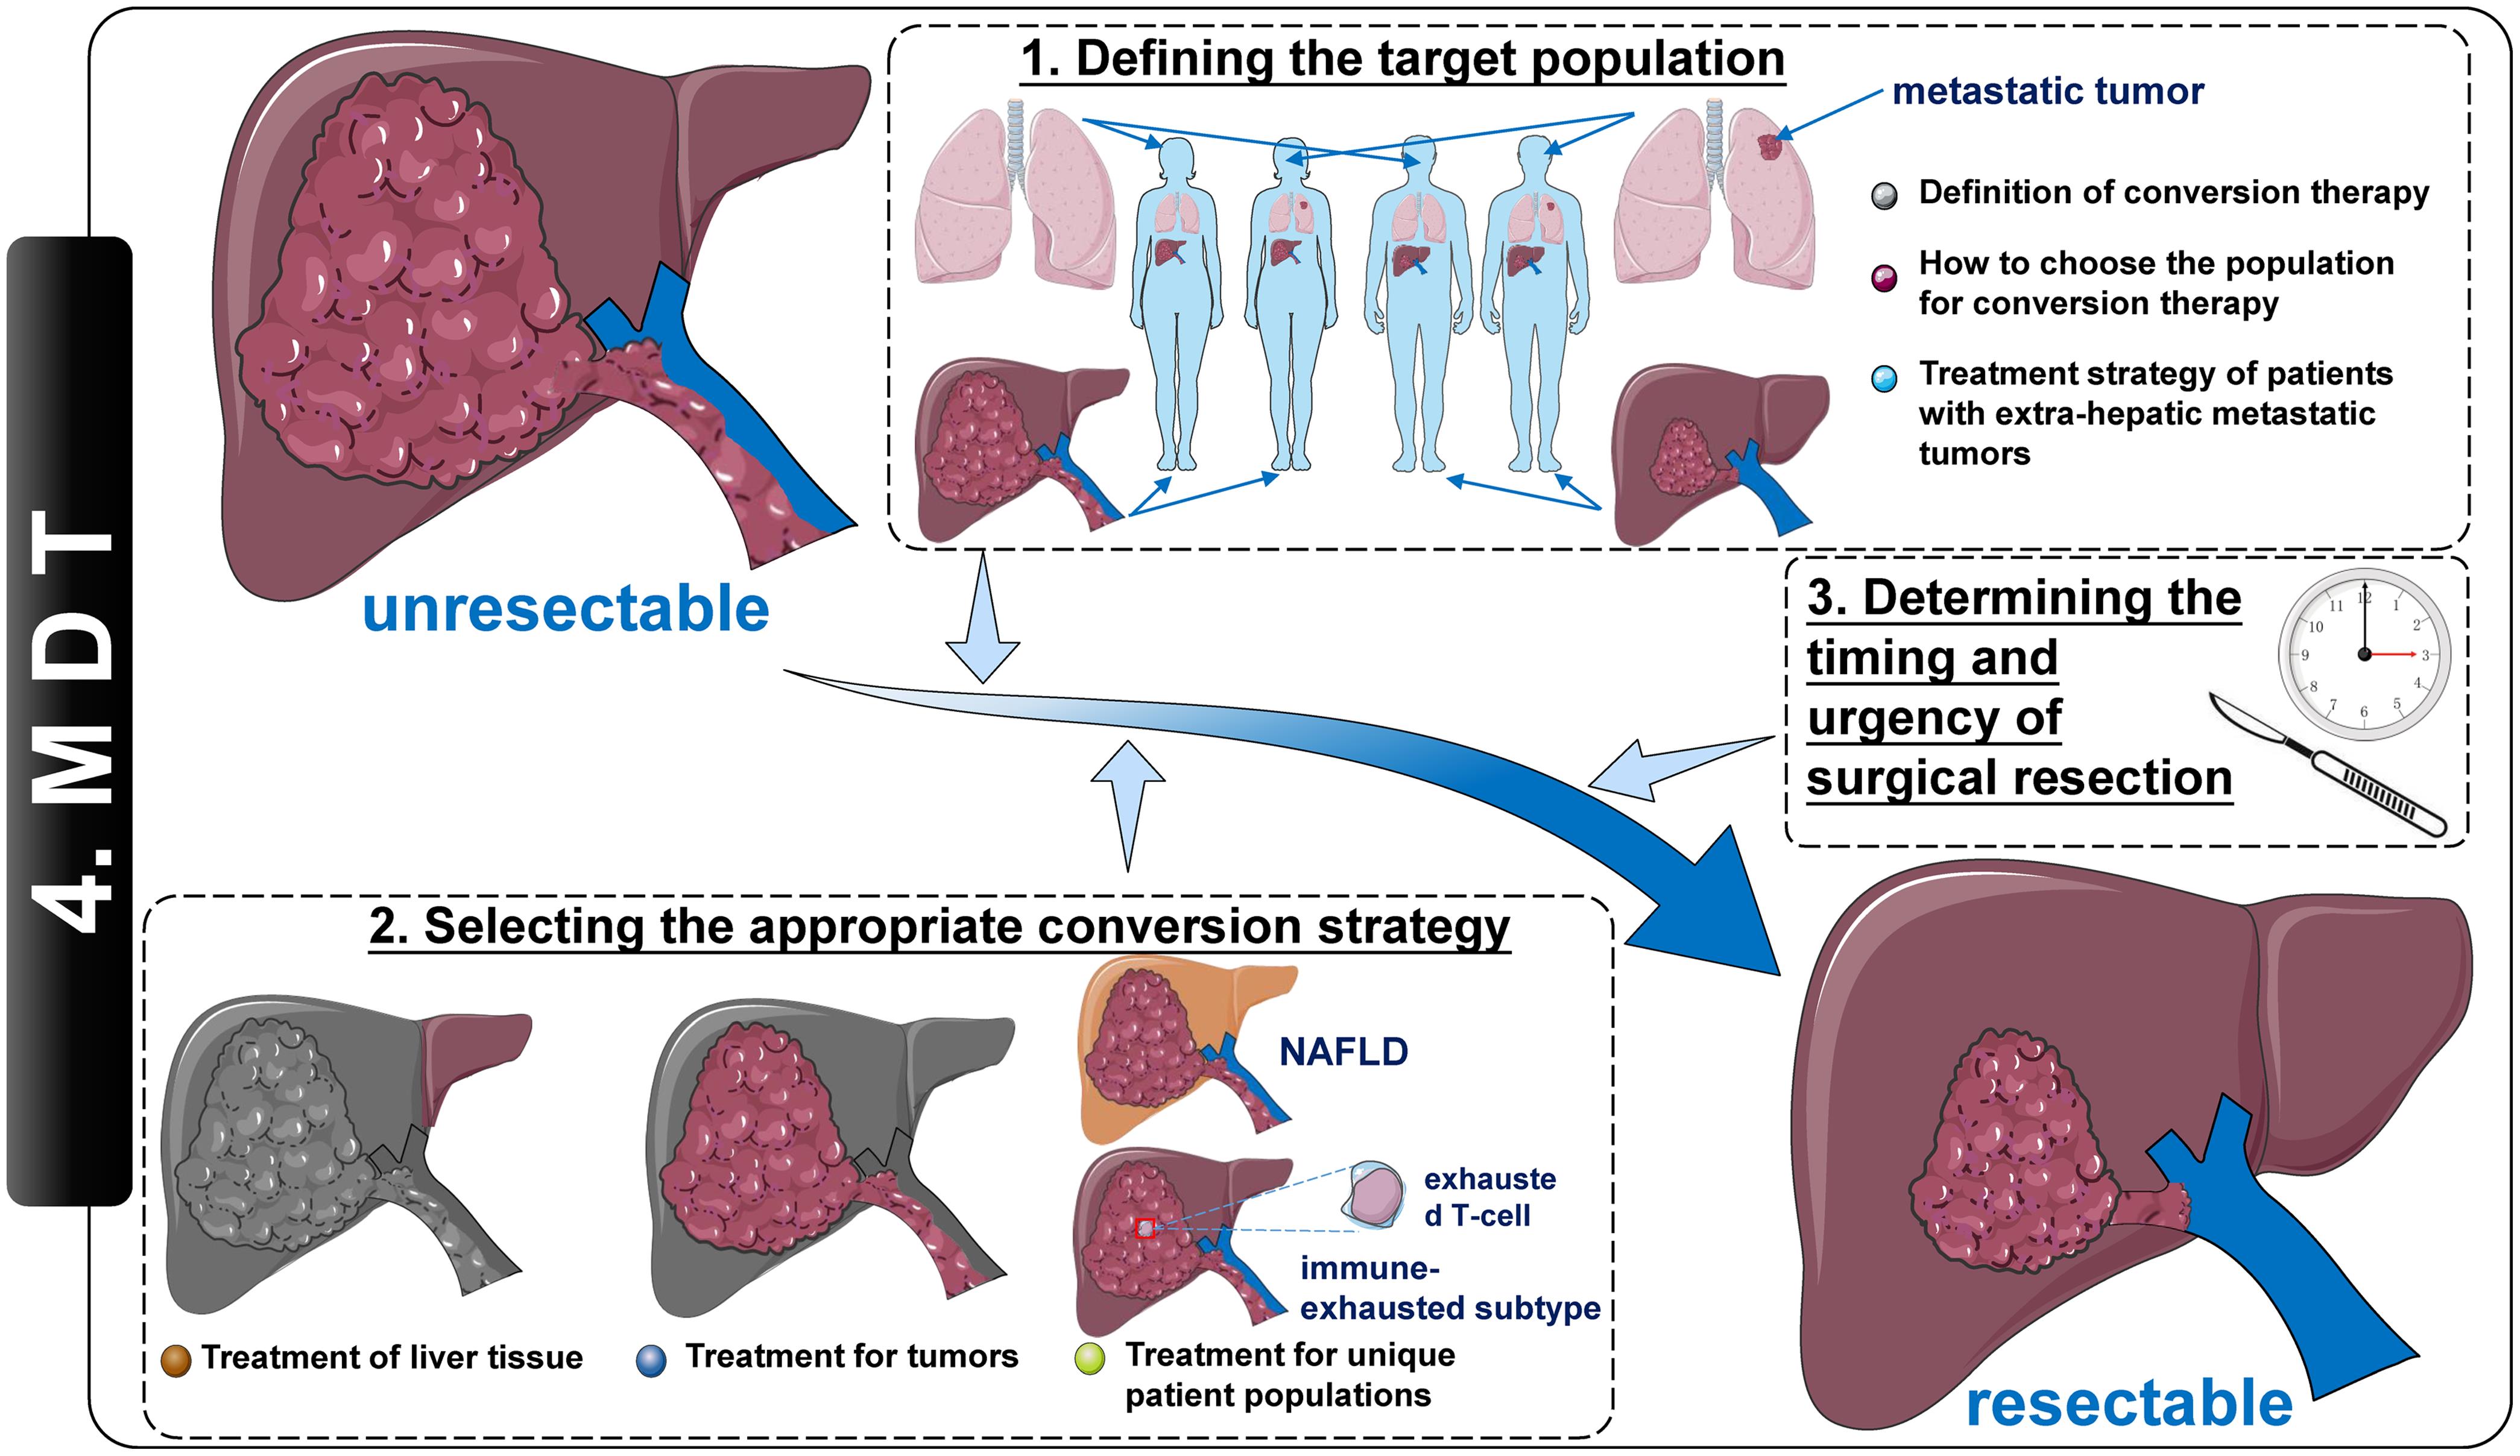 Illustration for conversion therapy in patients with “potentially resectable” hepatocellular carcinoma from four perspectives.